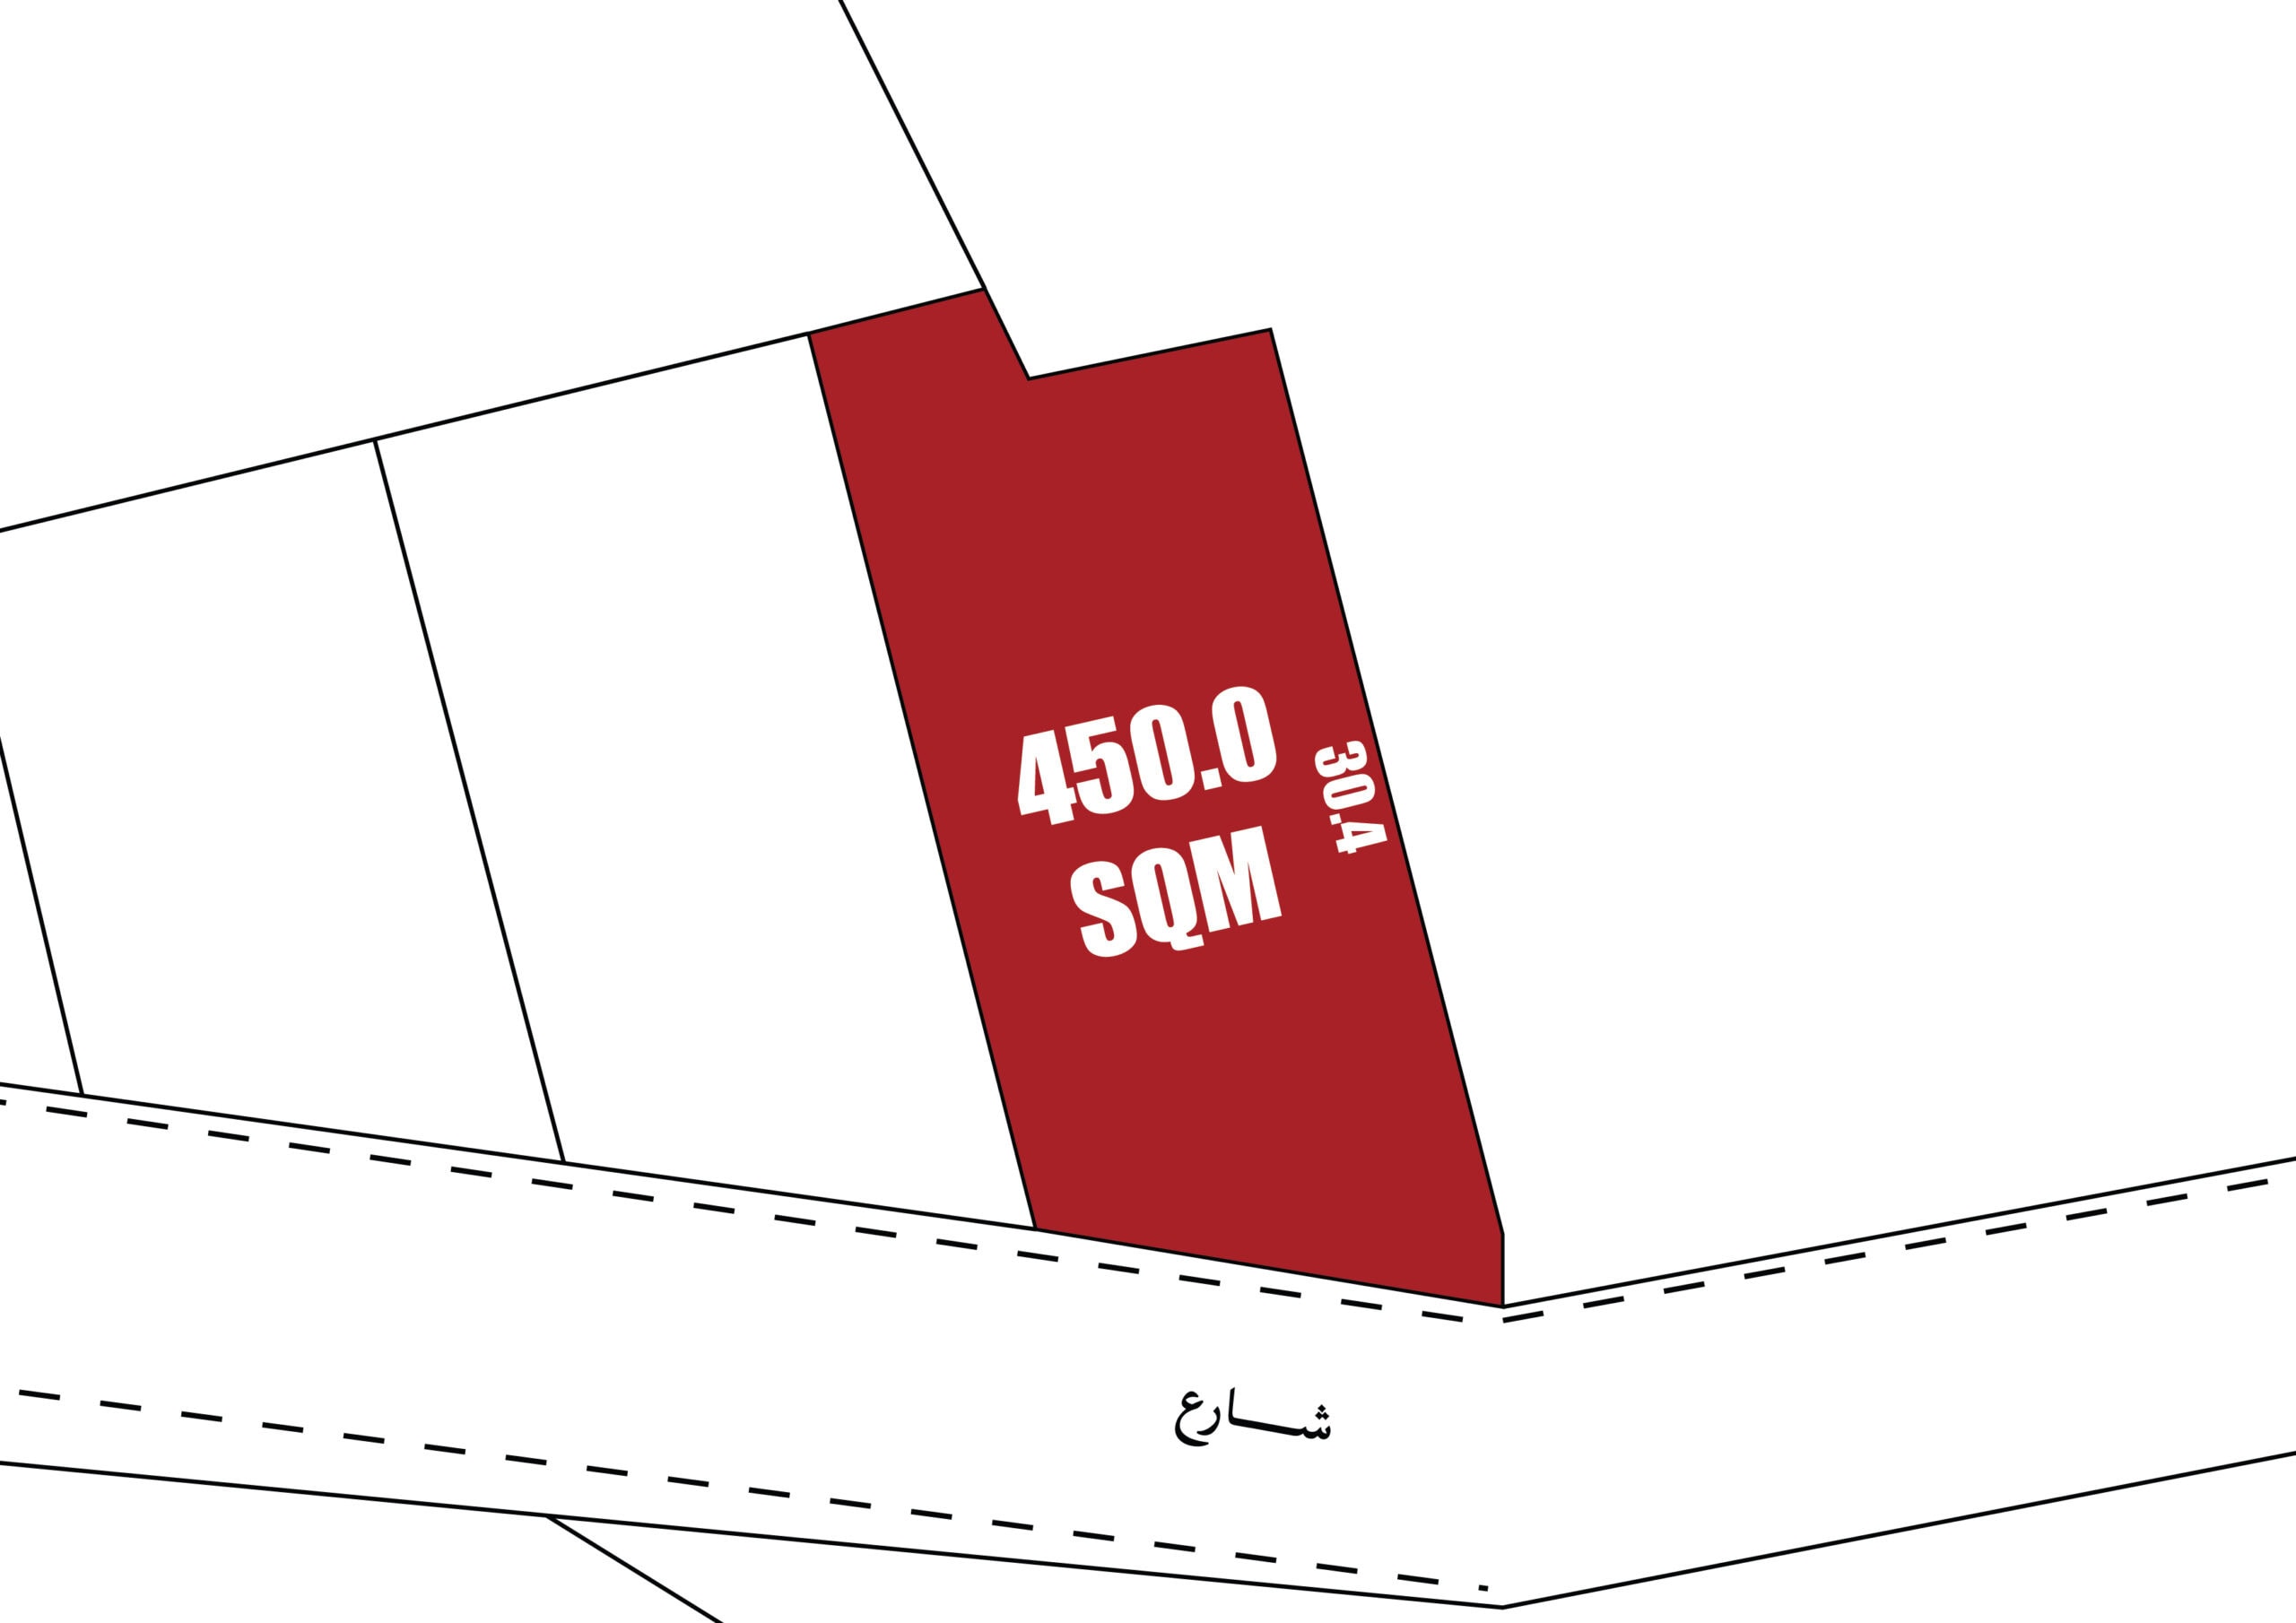 Residential Land for Sale in North Sehla | 450 SQM